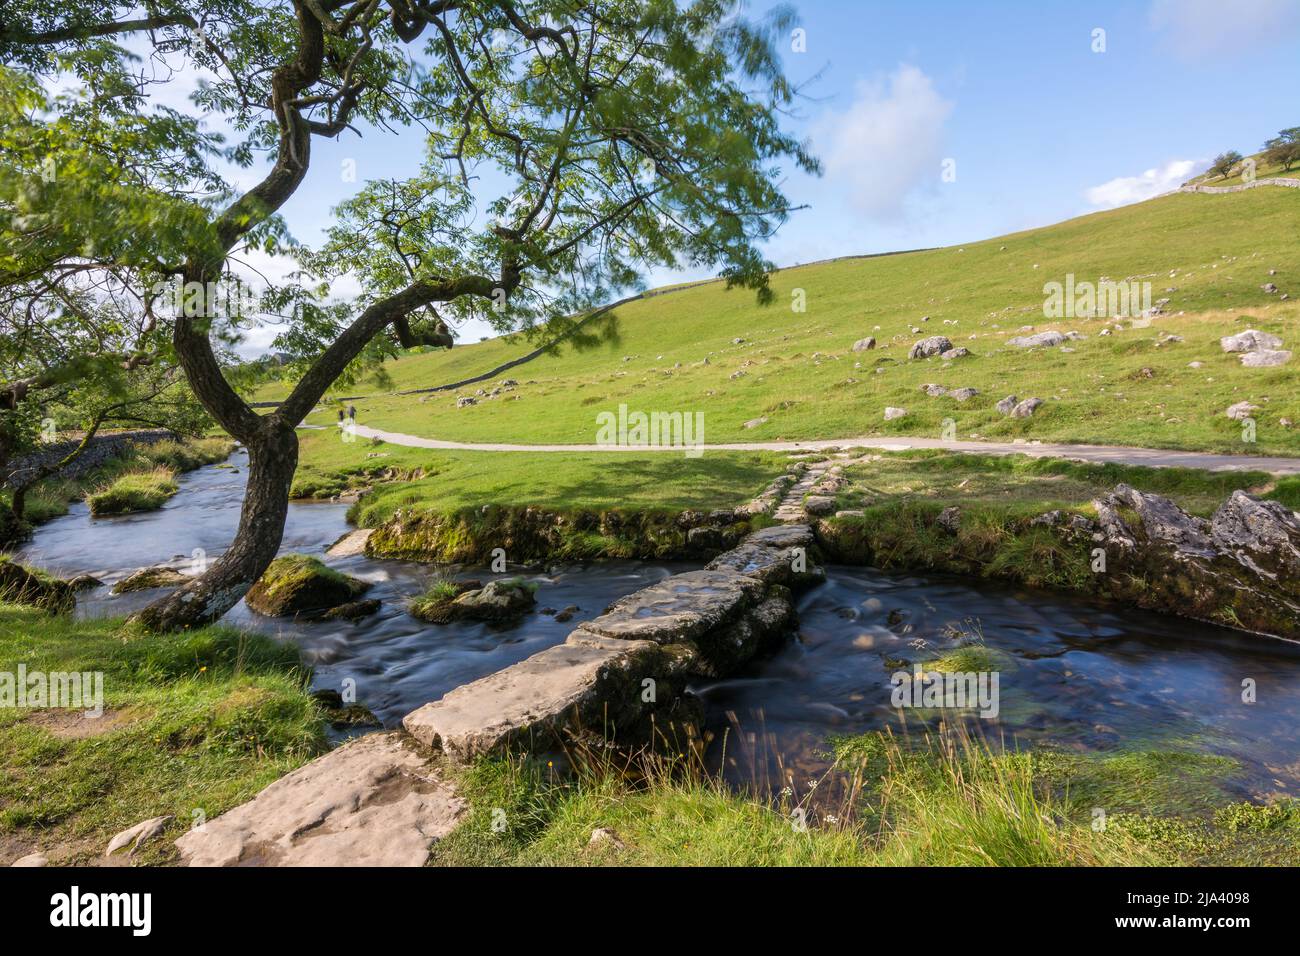 Improvised stone bridge over Malham Cove stream in the Yorkshire Dales National Park. Visited during the Dales High Way long distance walk. Stock Photo